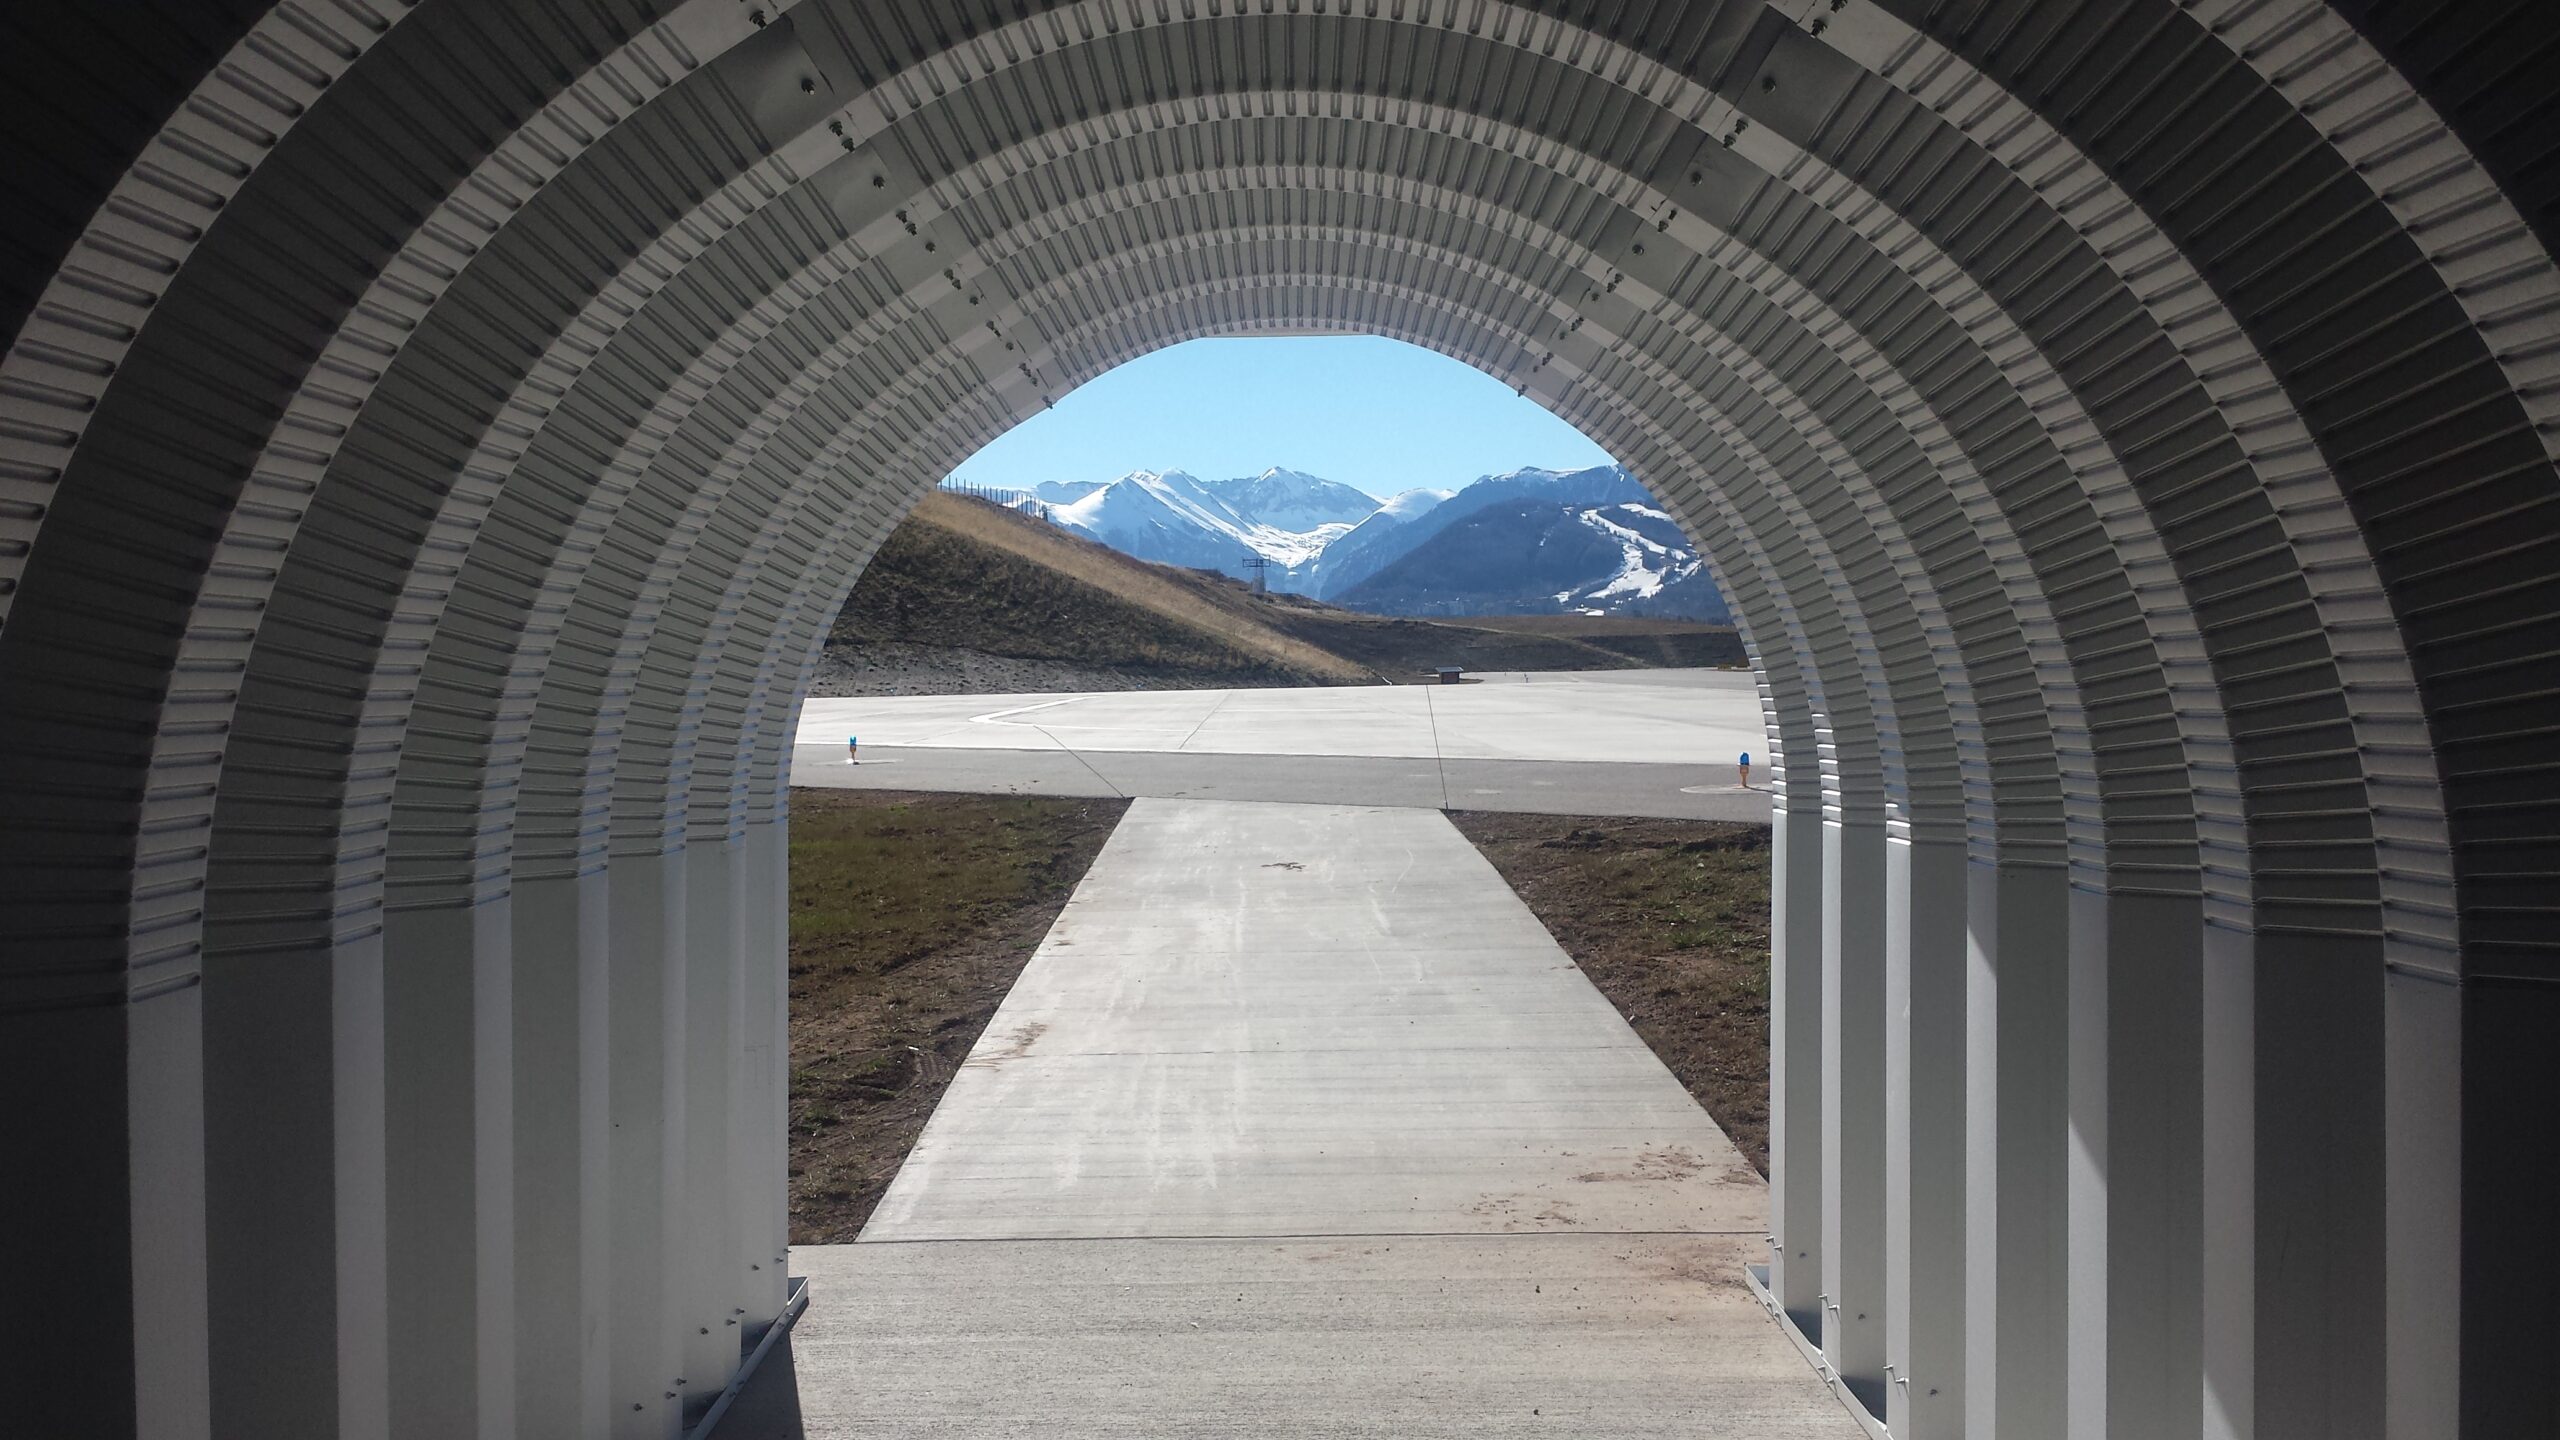 view from inside steel quonset hut of colorado mountains